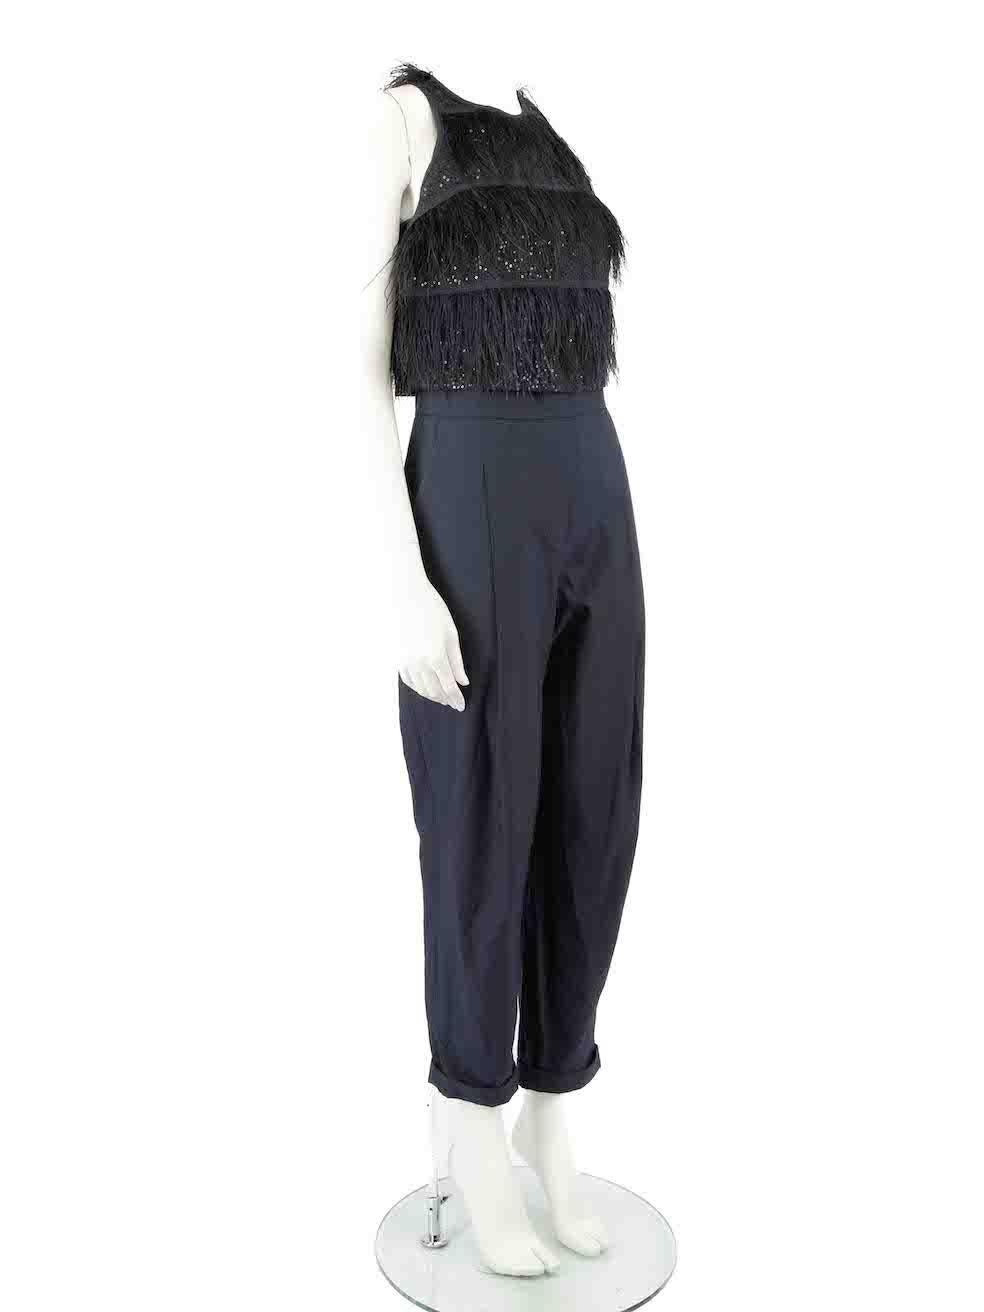 CONDITION is Very good. Minimal wear to jumpsuit is evident. Minimal wear to the centre-back lining with light discolouration along the zip seam on this used Brunello Cucinelli designer resale item.
 
 
 
 Details
 
 
 Navy
 
 Cotton
 
 Jumpsuit
 
